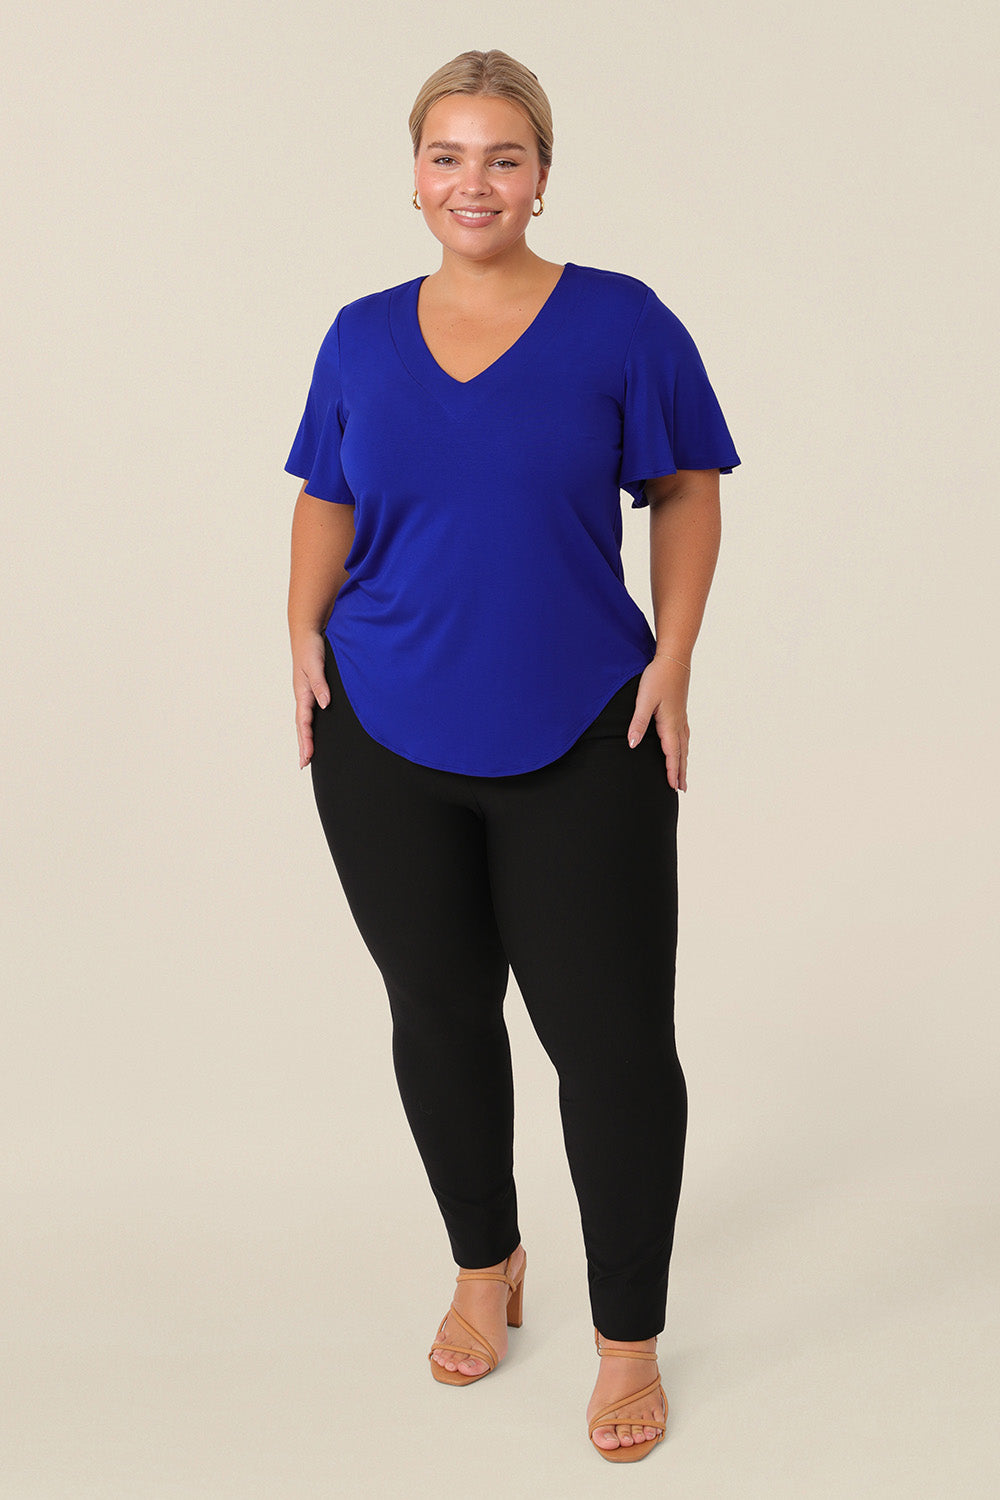 A petite height, size 14 woman wears a V-neck blue top with short flutter sleeves. Made from bamboo jersey, this is a natural fibre top that is lightweight, breathable and sustainable. The blue bamboo jersey top is worn over slim-leg black jersey trousers for a smart-casual look.